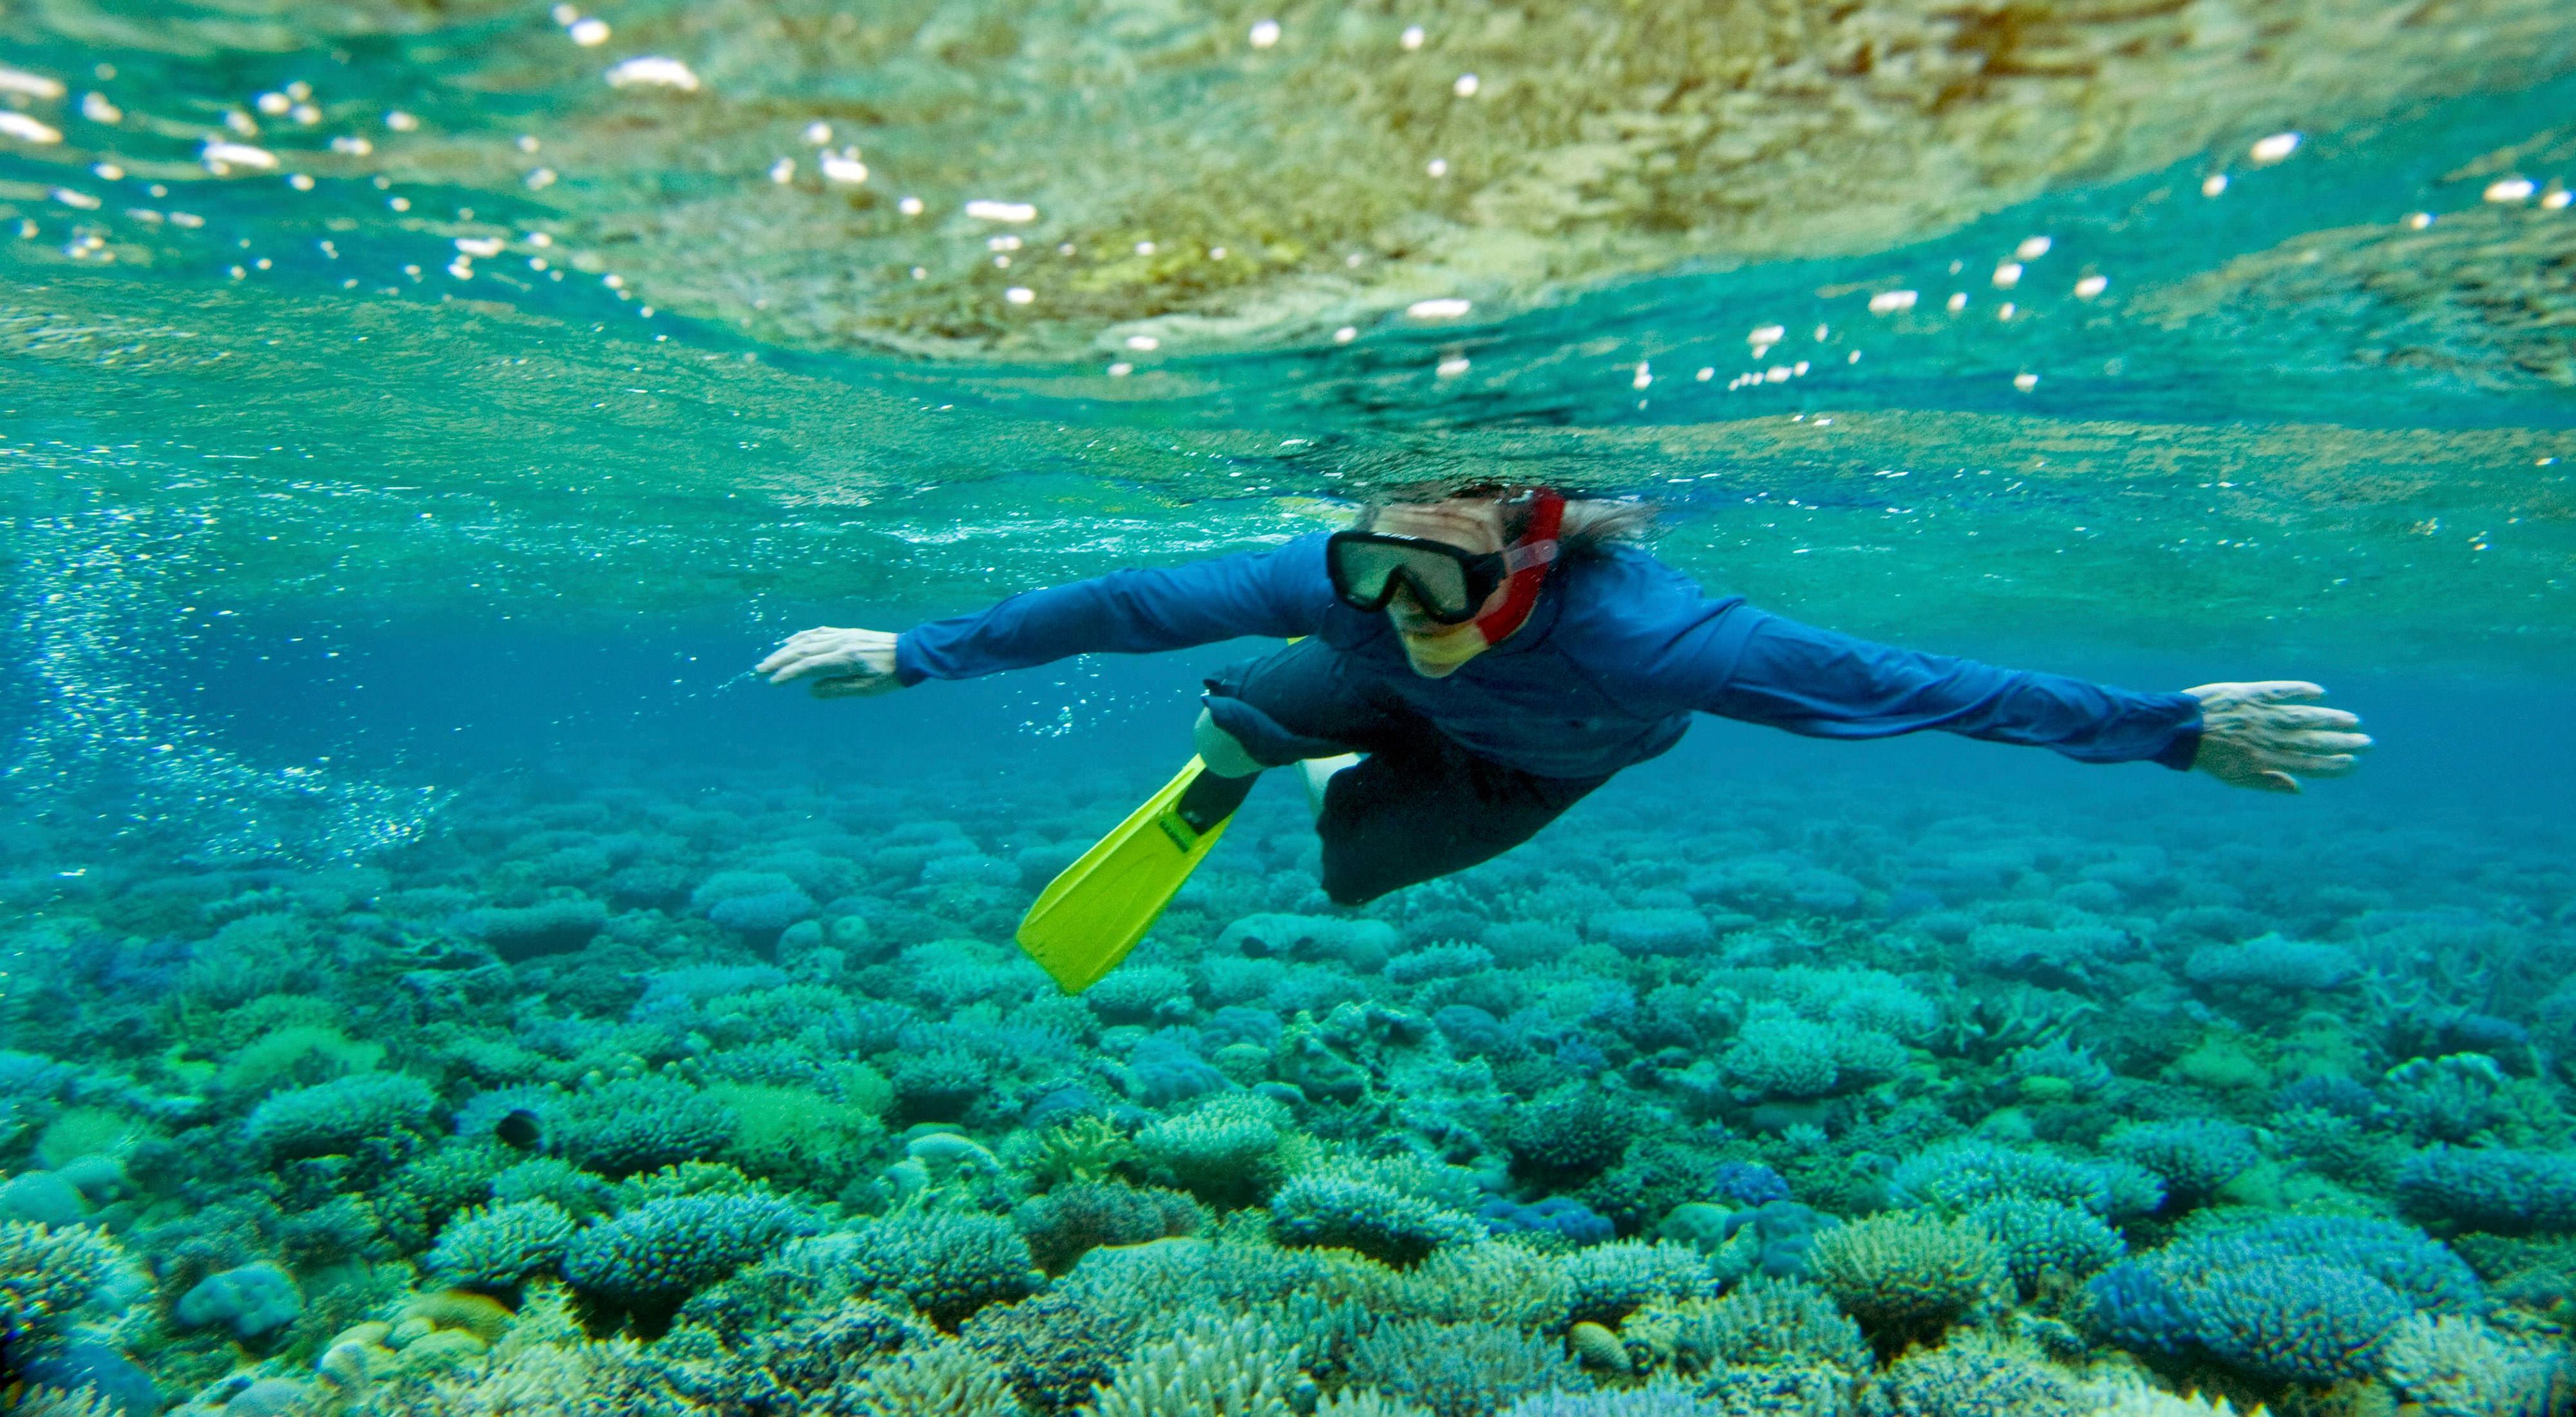 How Tourism Can Be Good for Coral Reefs